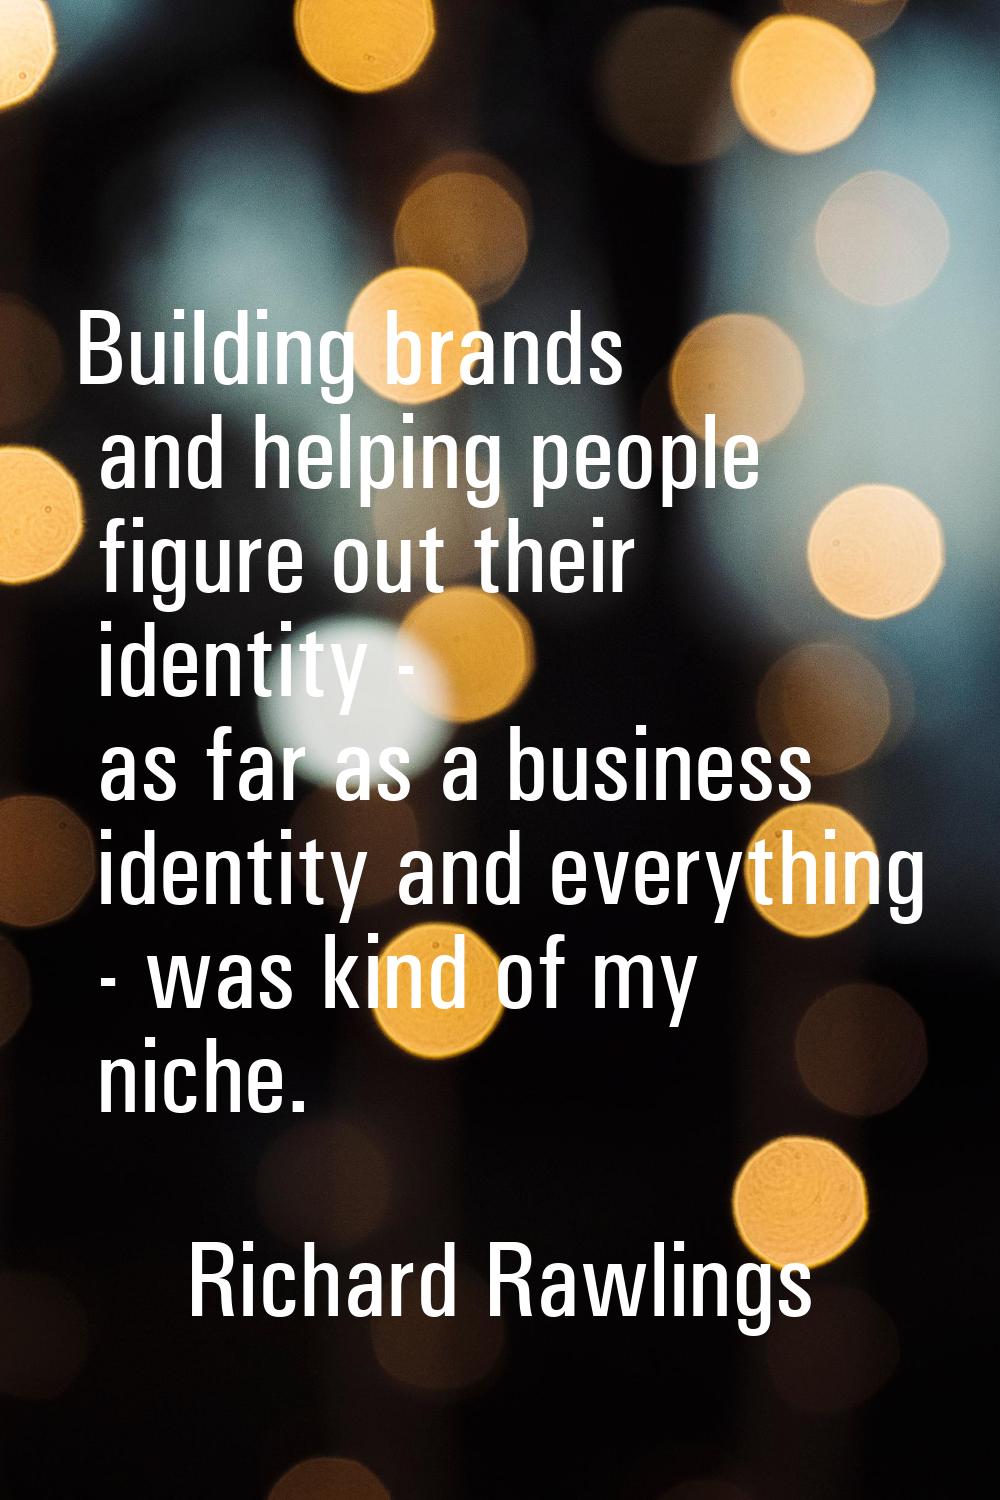 Building brands and helping people figure out their identity - as far as a business identity and ev